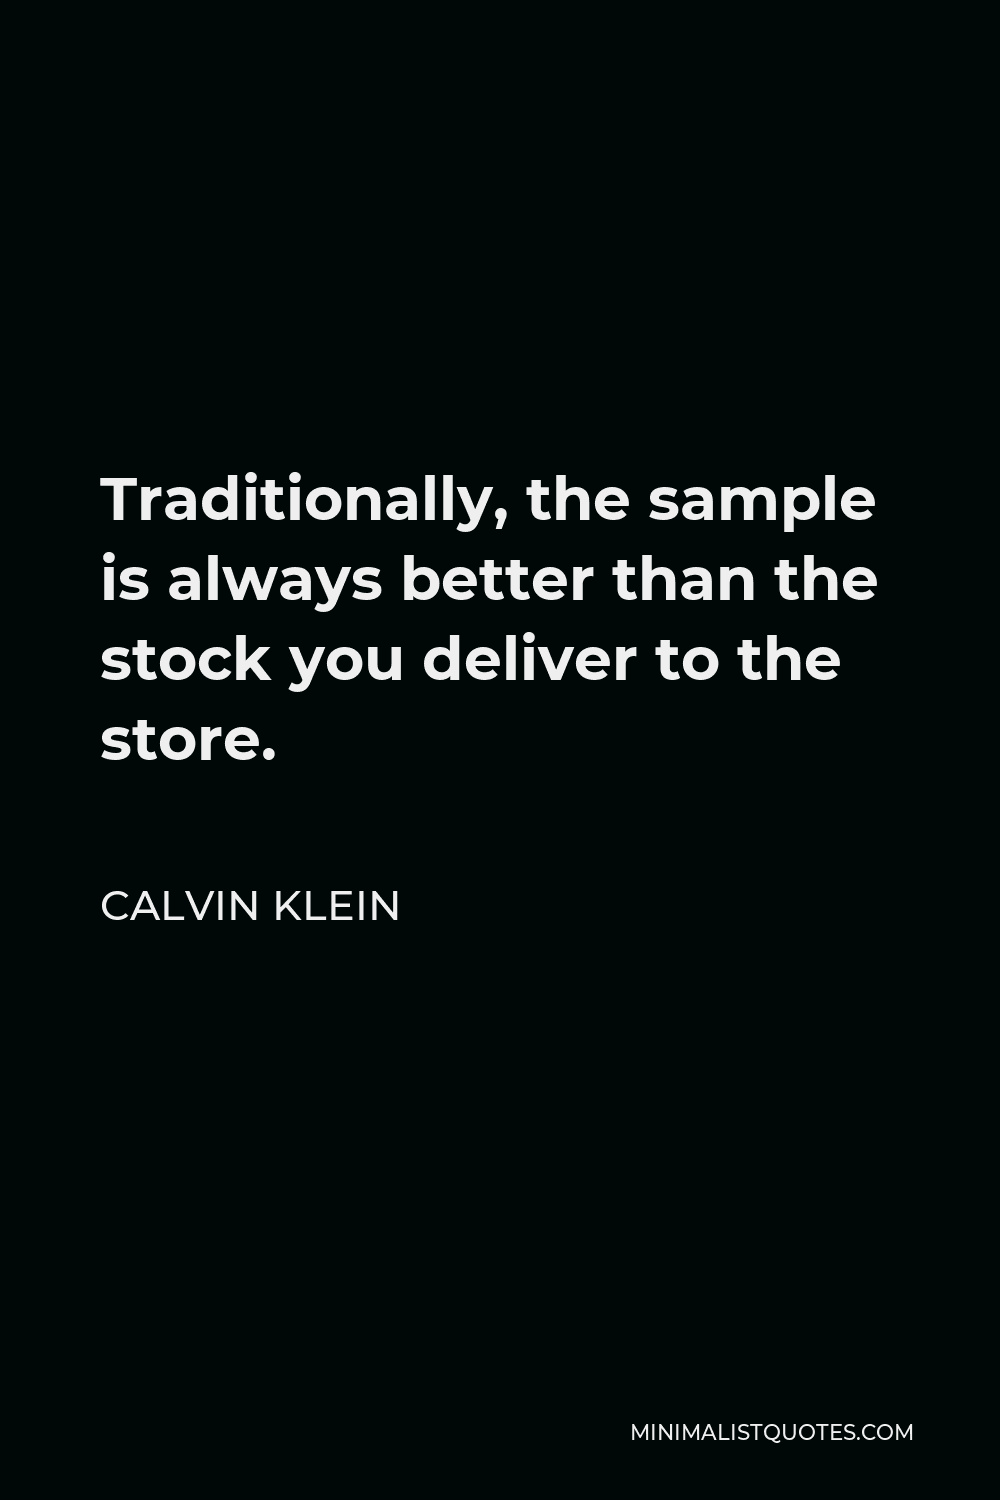 Calvin Klein Quote: Traditionally, the sample is always better than the  stock you deliver to the store.